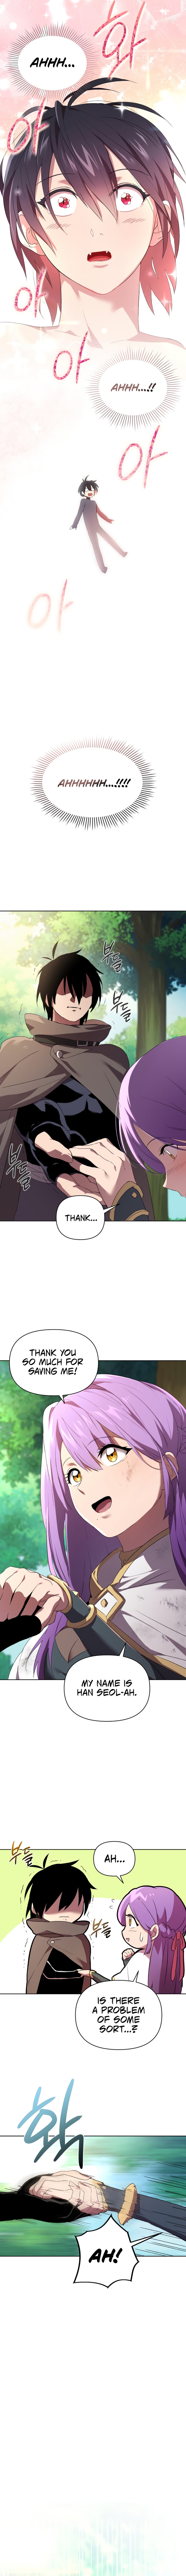 Player Who Returned 10,000 Years Later - Chapter 4 Page 11